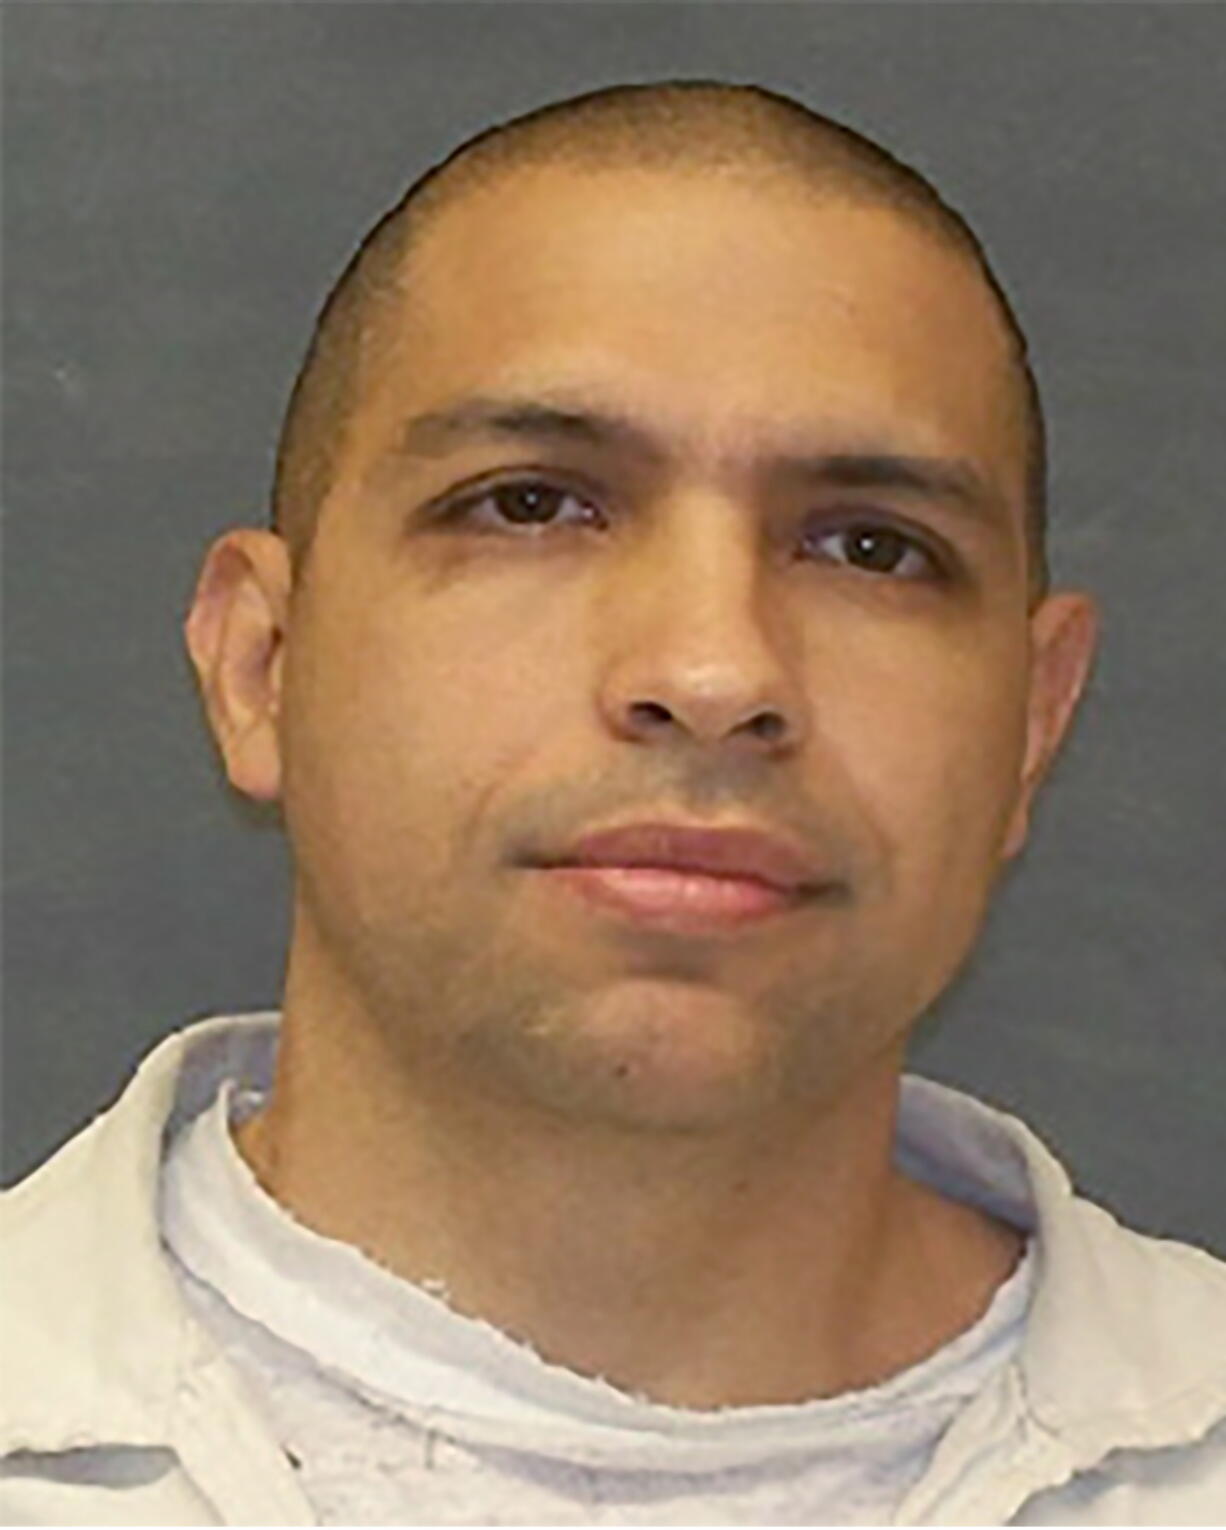 This undated photo provided by the Texas Department of Criminal Justice shows Gonzalo Lopez. The Texas Department of Criminal Justice (TDCJ) is searching for Lopez, an escaped inmate in Leon County Thursday, May 12, 2022. Lopez assaulted a correctional officer on a transport bus and then fled from the vehicle.